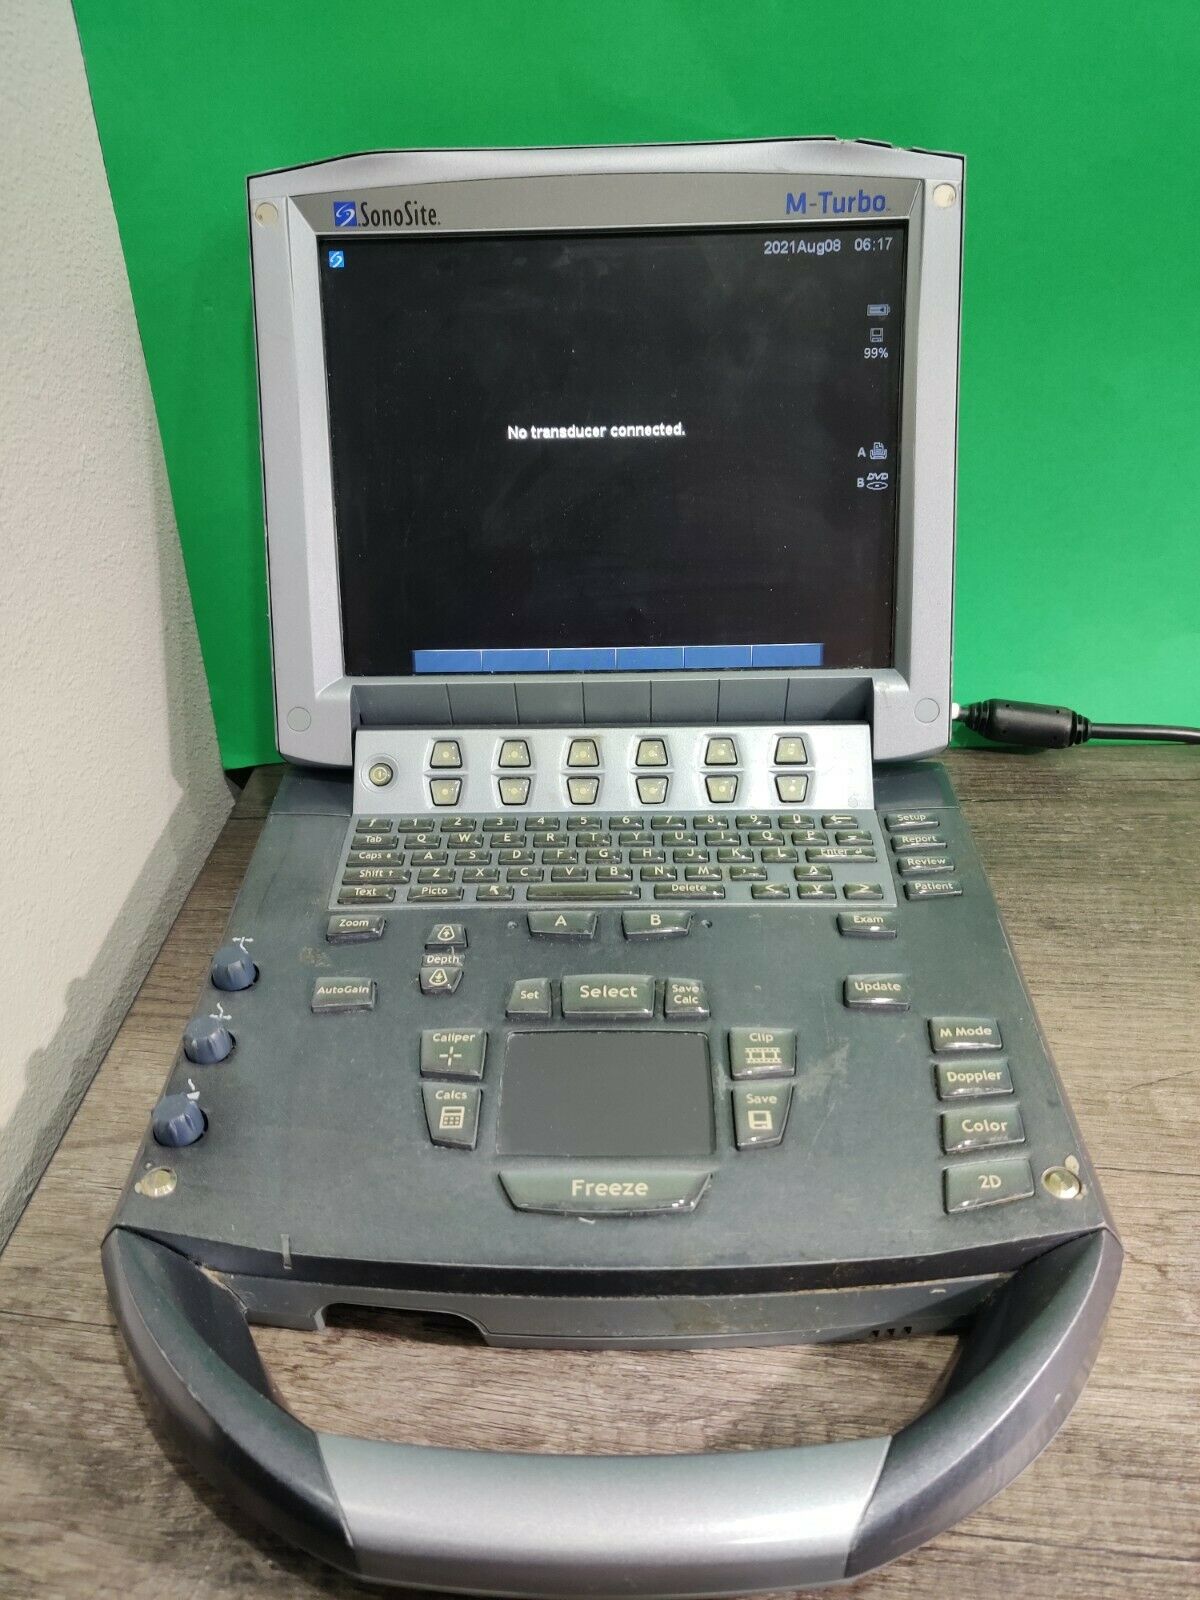 SONOSITE M-TURBO PORTABLE ULTRASOUND (FOR PARTS OR NOT WORKING) DIAGNOSTIC ULTRASOUND MACHINES FOR SALE